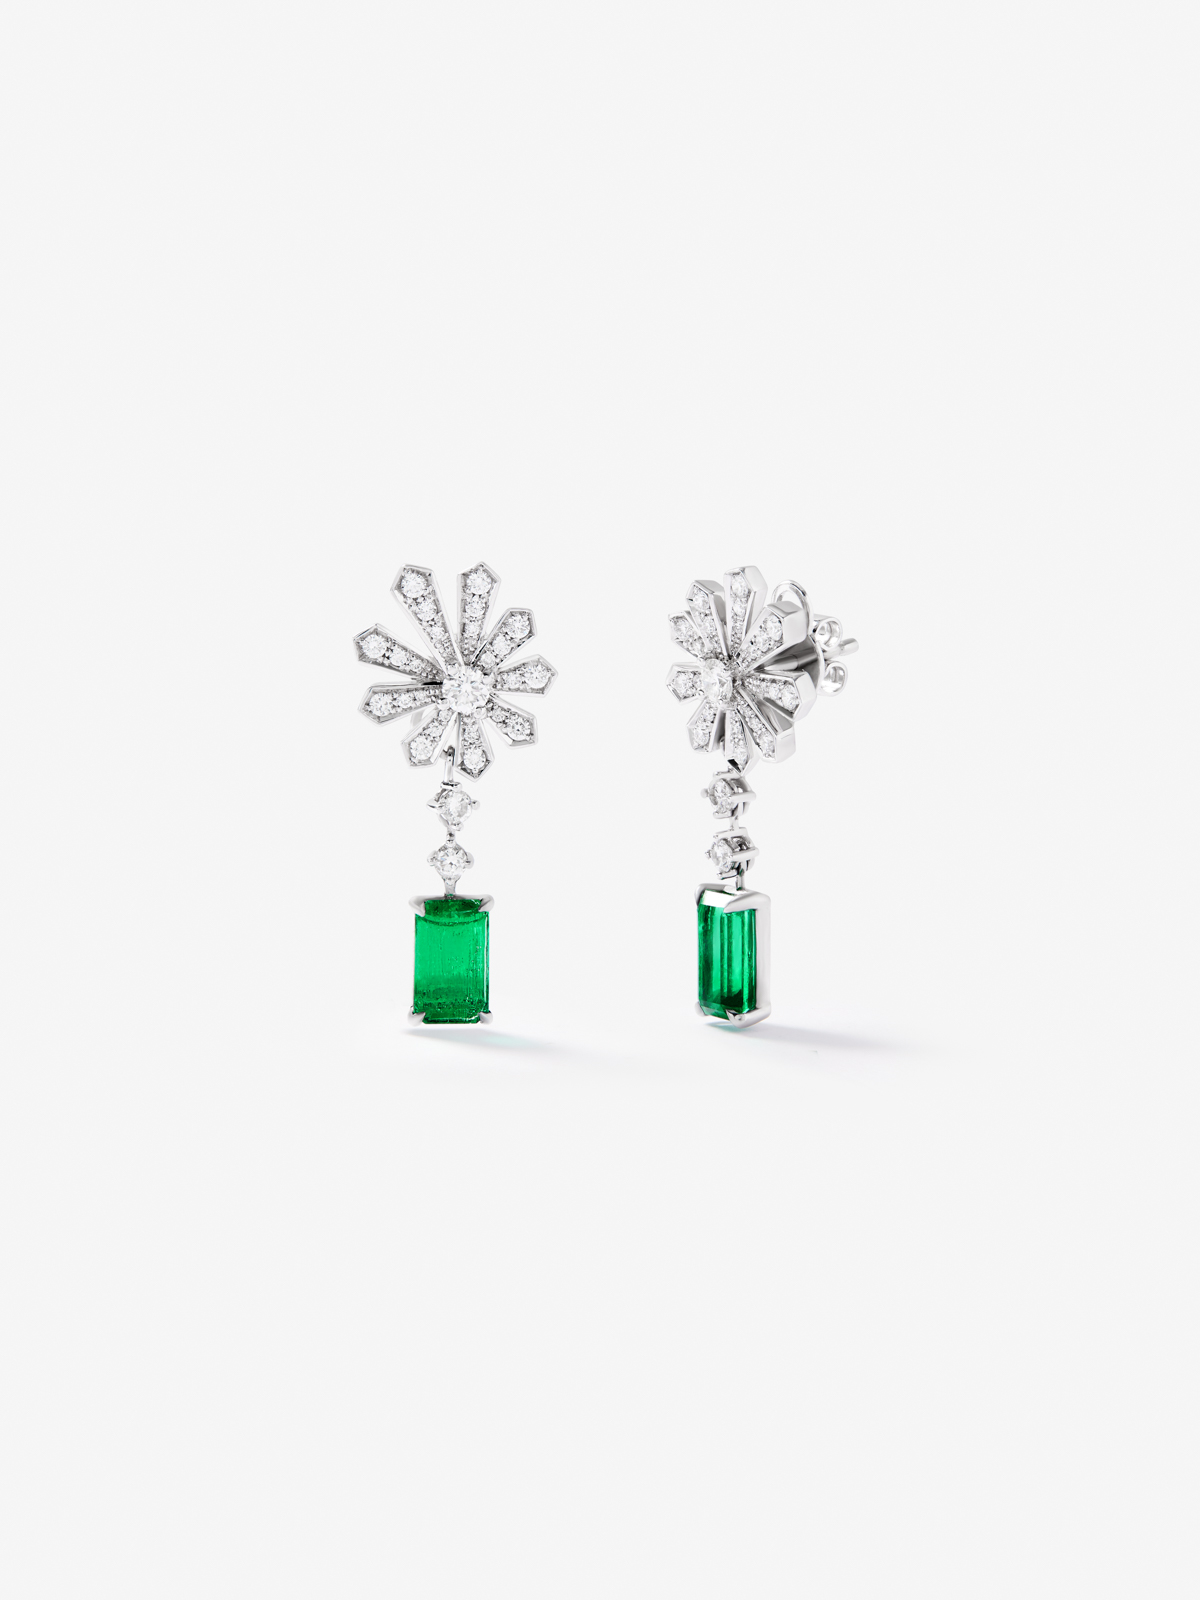 18K white gold earrings with green emeralds in octagonal size of 3.12 cts and white diamonds in bright size of 0.9 cts